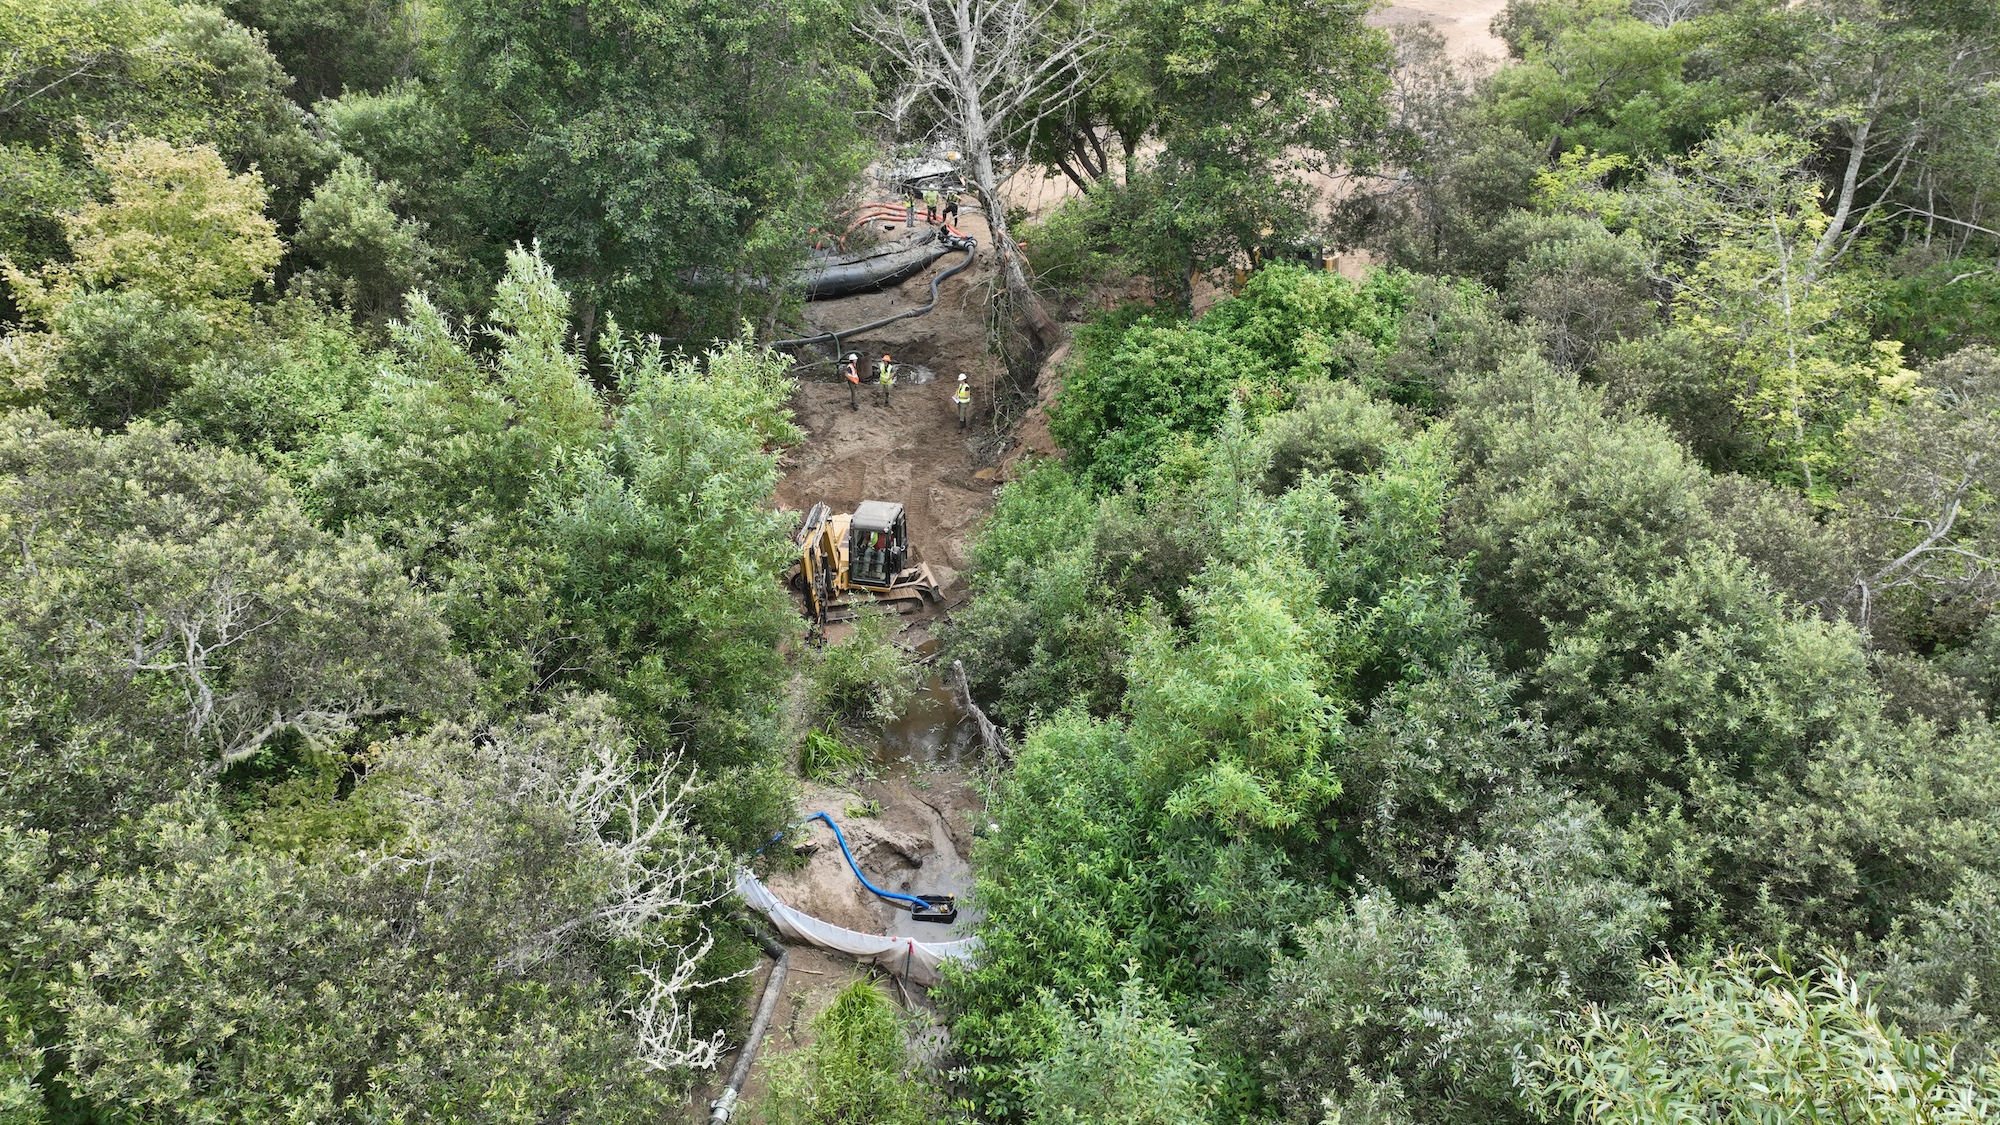 An aerial view shows the construction happening at the Butano Creek Restoration site.